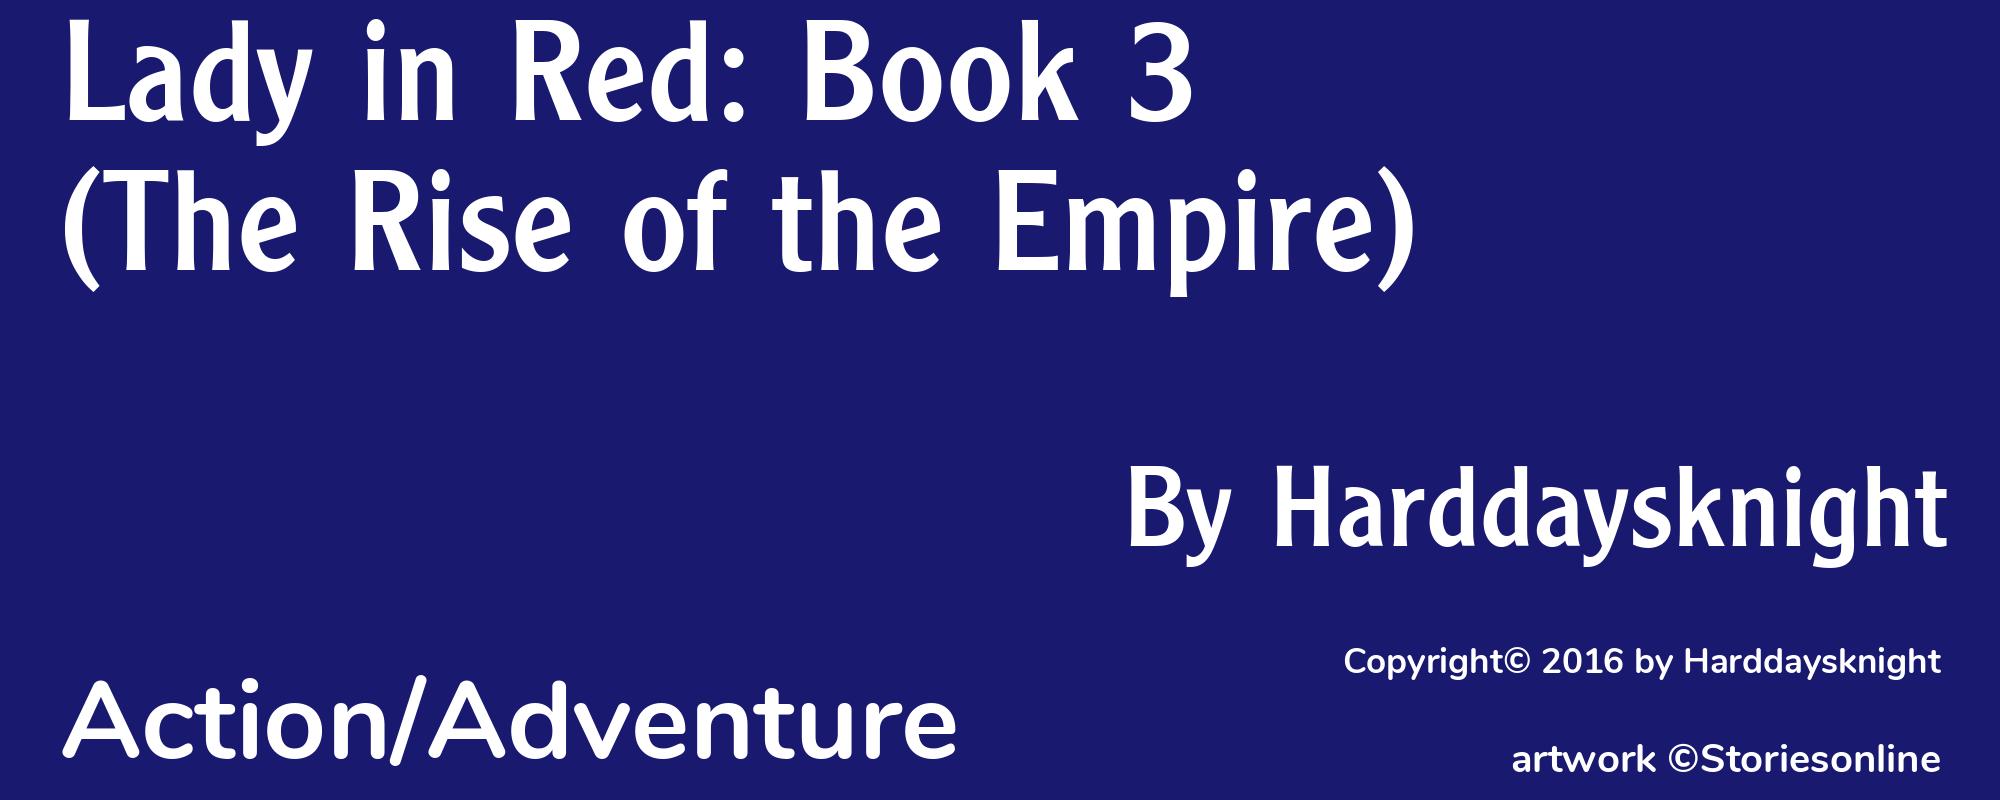 Lady in Red: Book 3 (The Rise of the Empire) - Cover